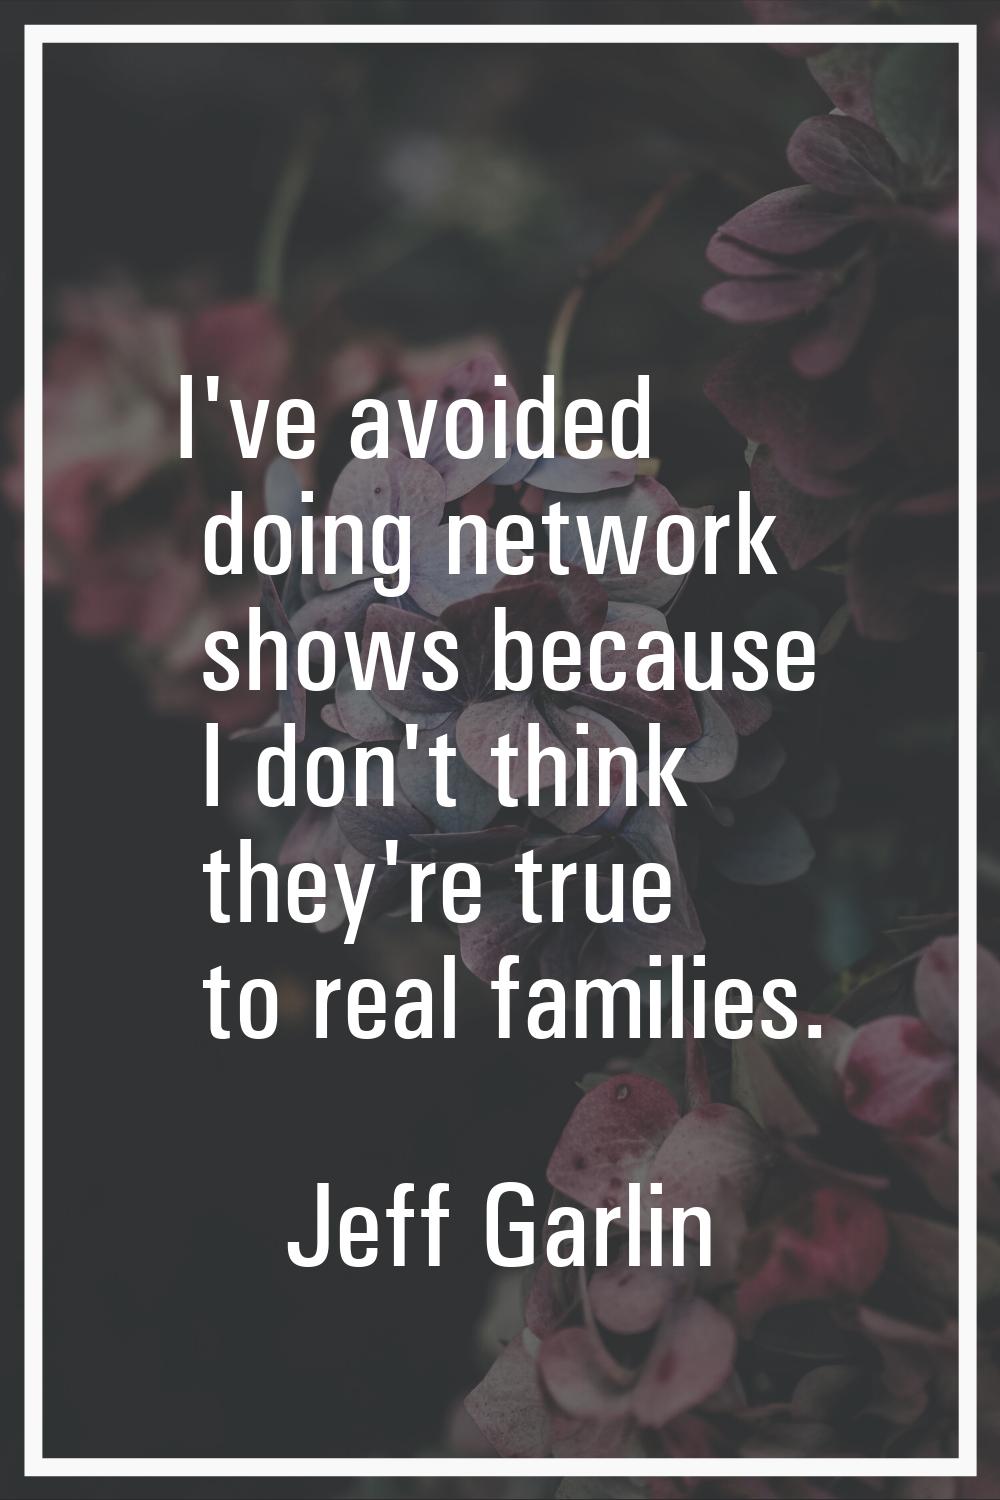 I've avoided doing network shows because I don't think they're true to real families.